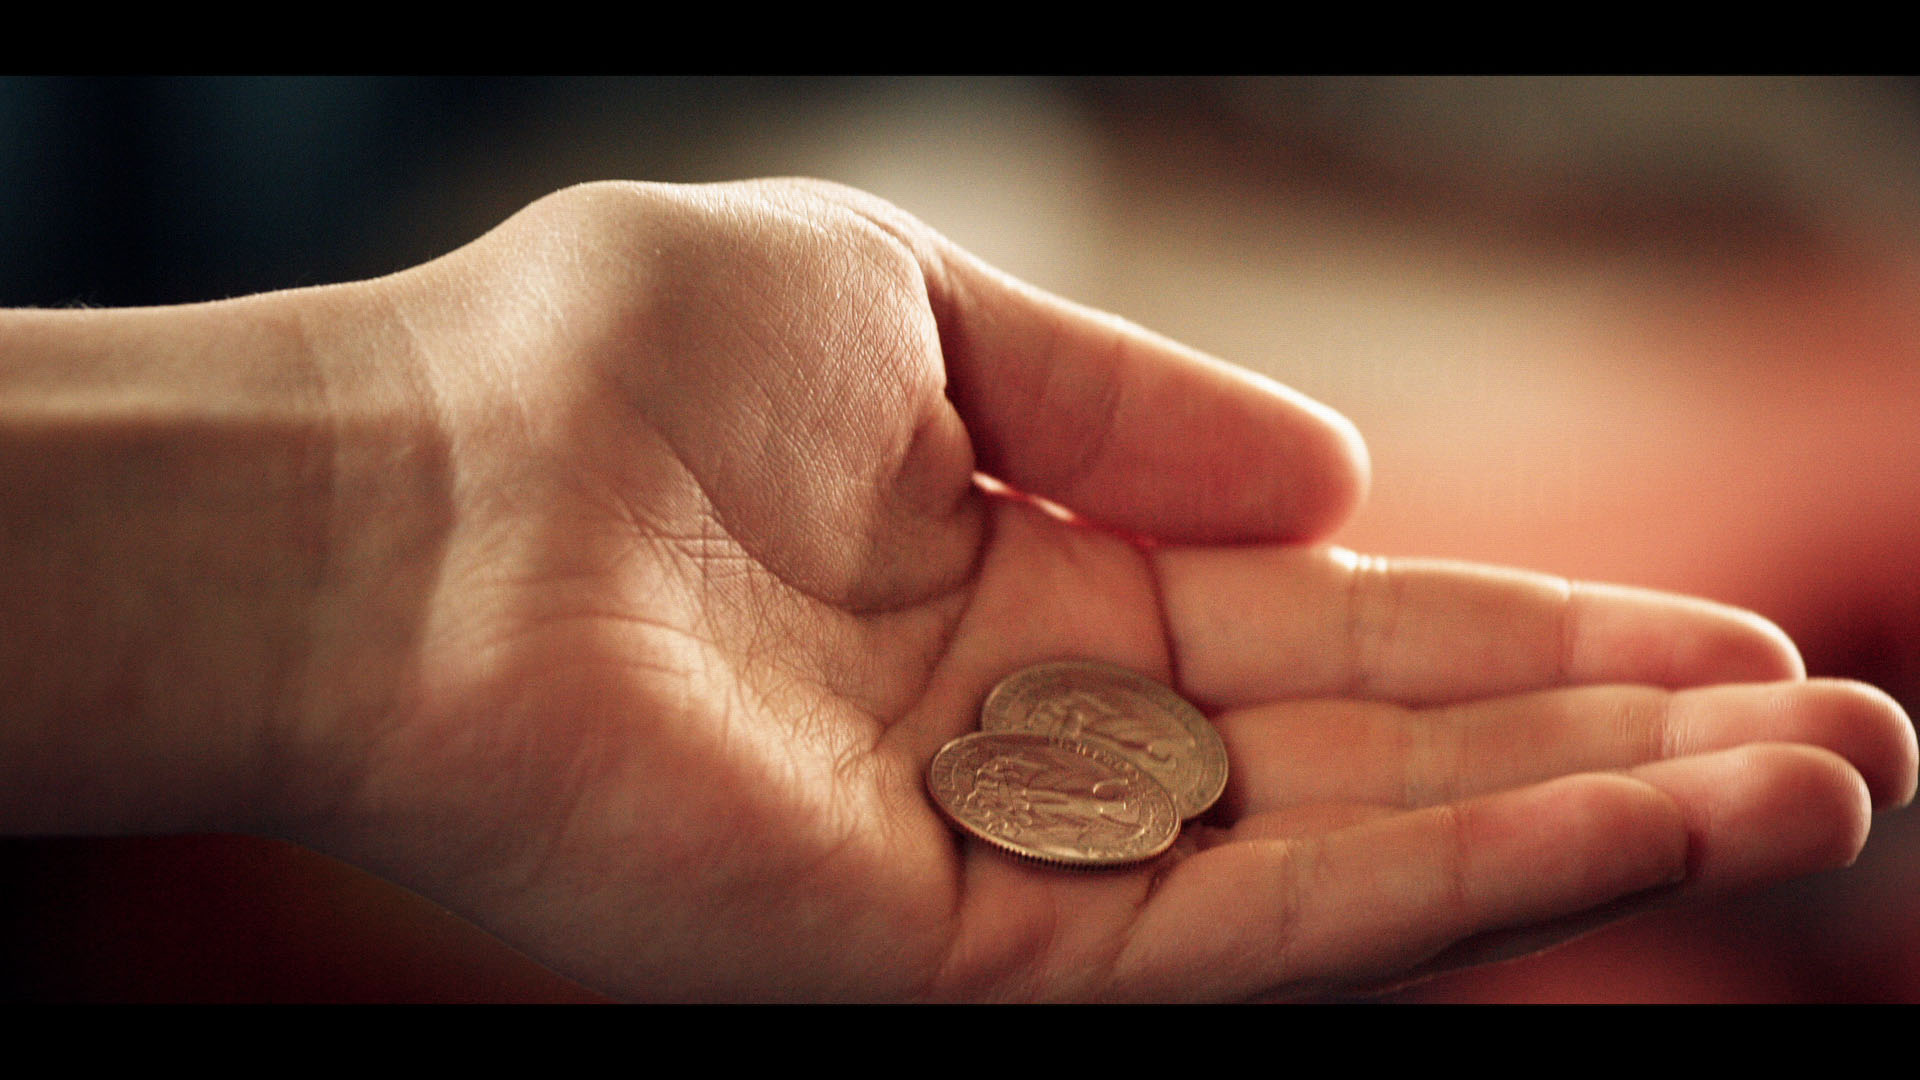 A photo of a hand with two coins in the palm.